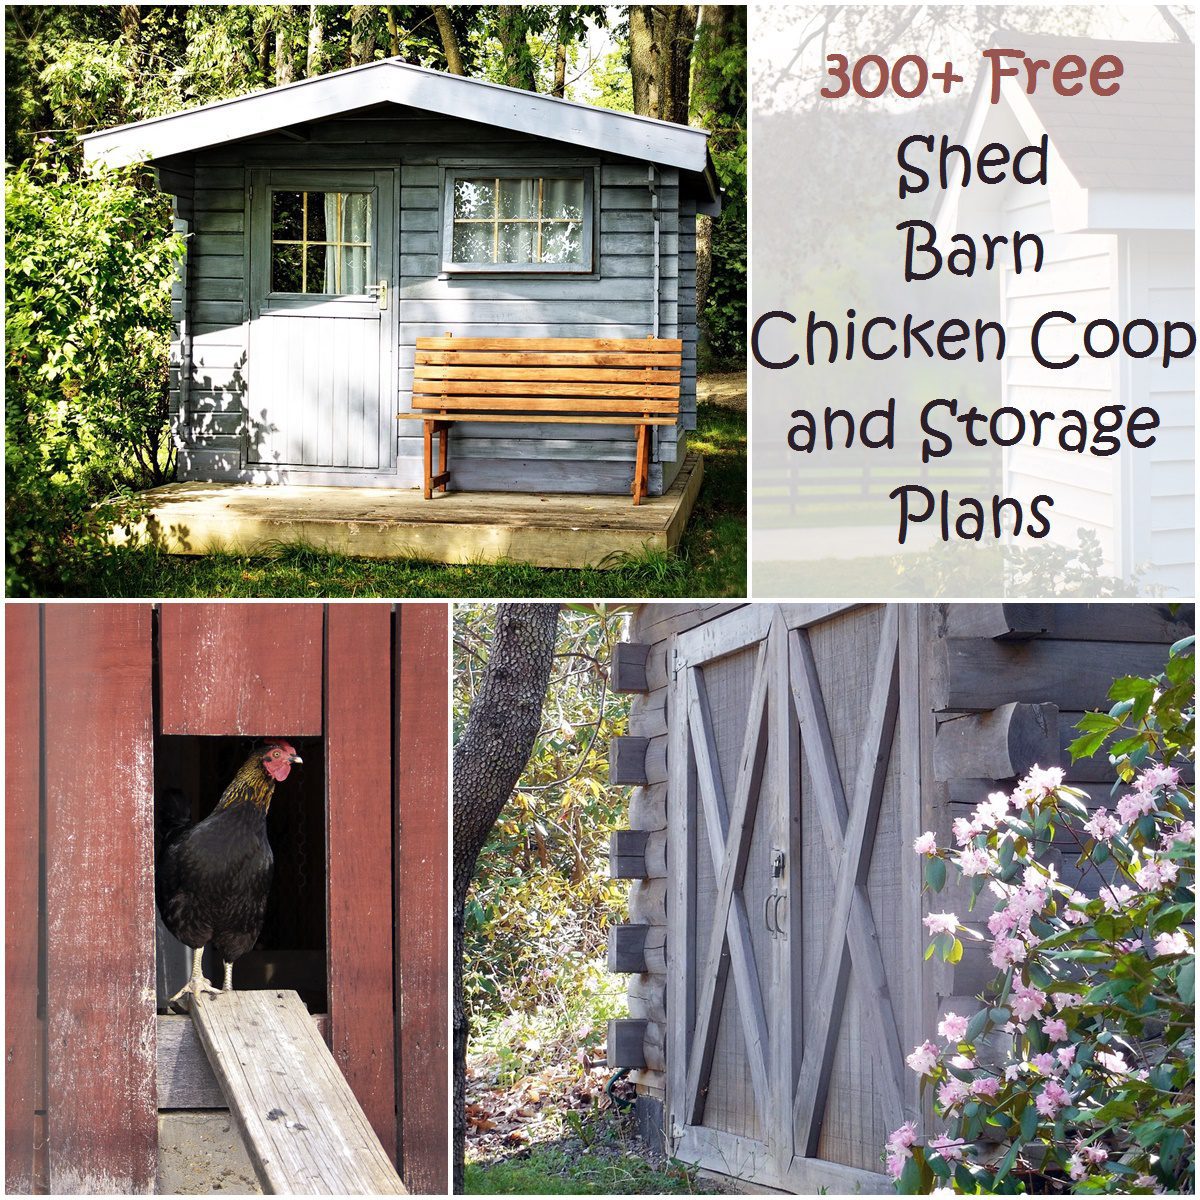 300+ Shed, Barn, Chicken Coop and Storage Plans (plus more!)